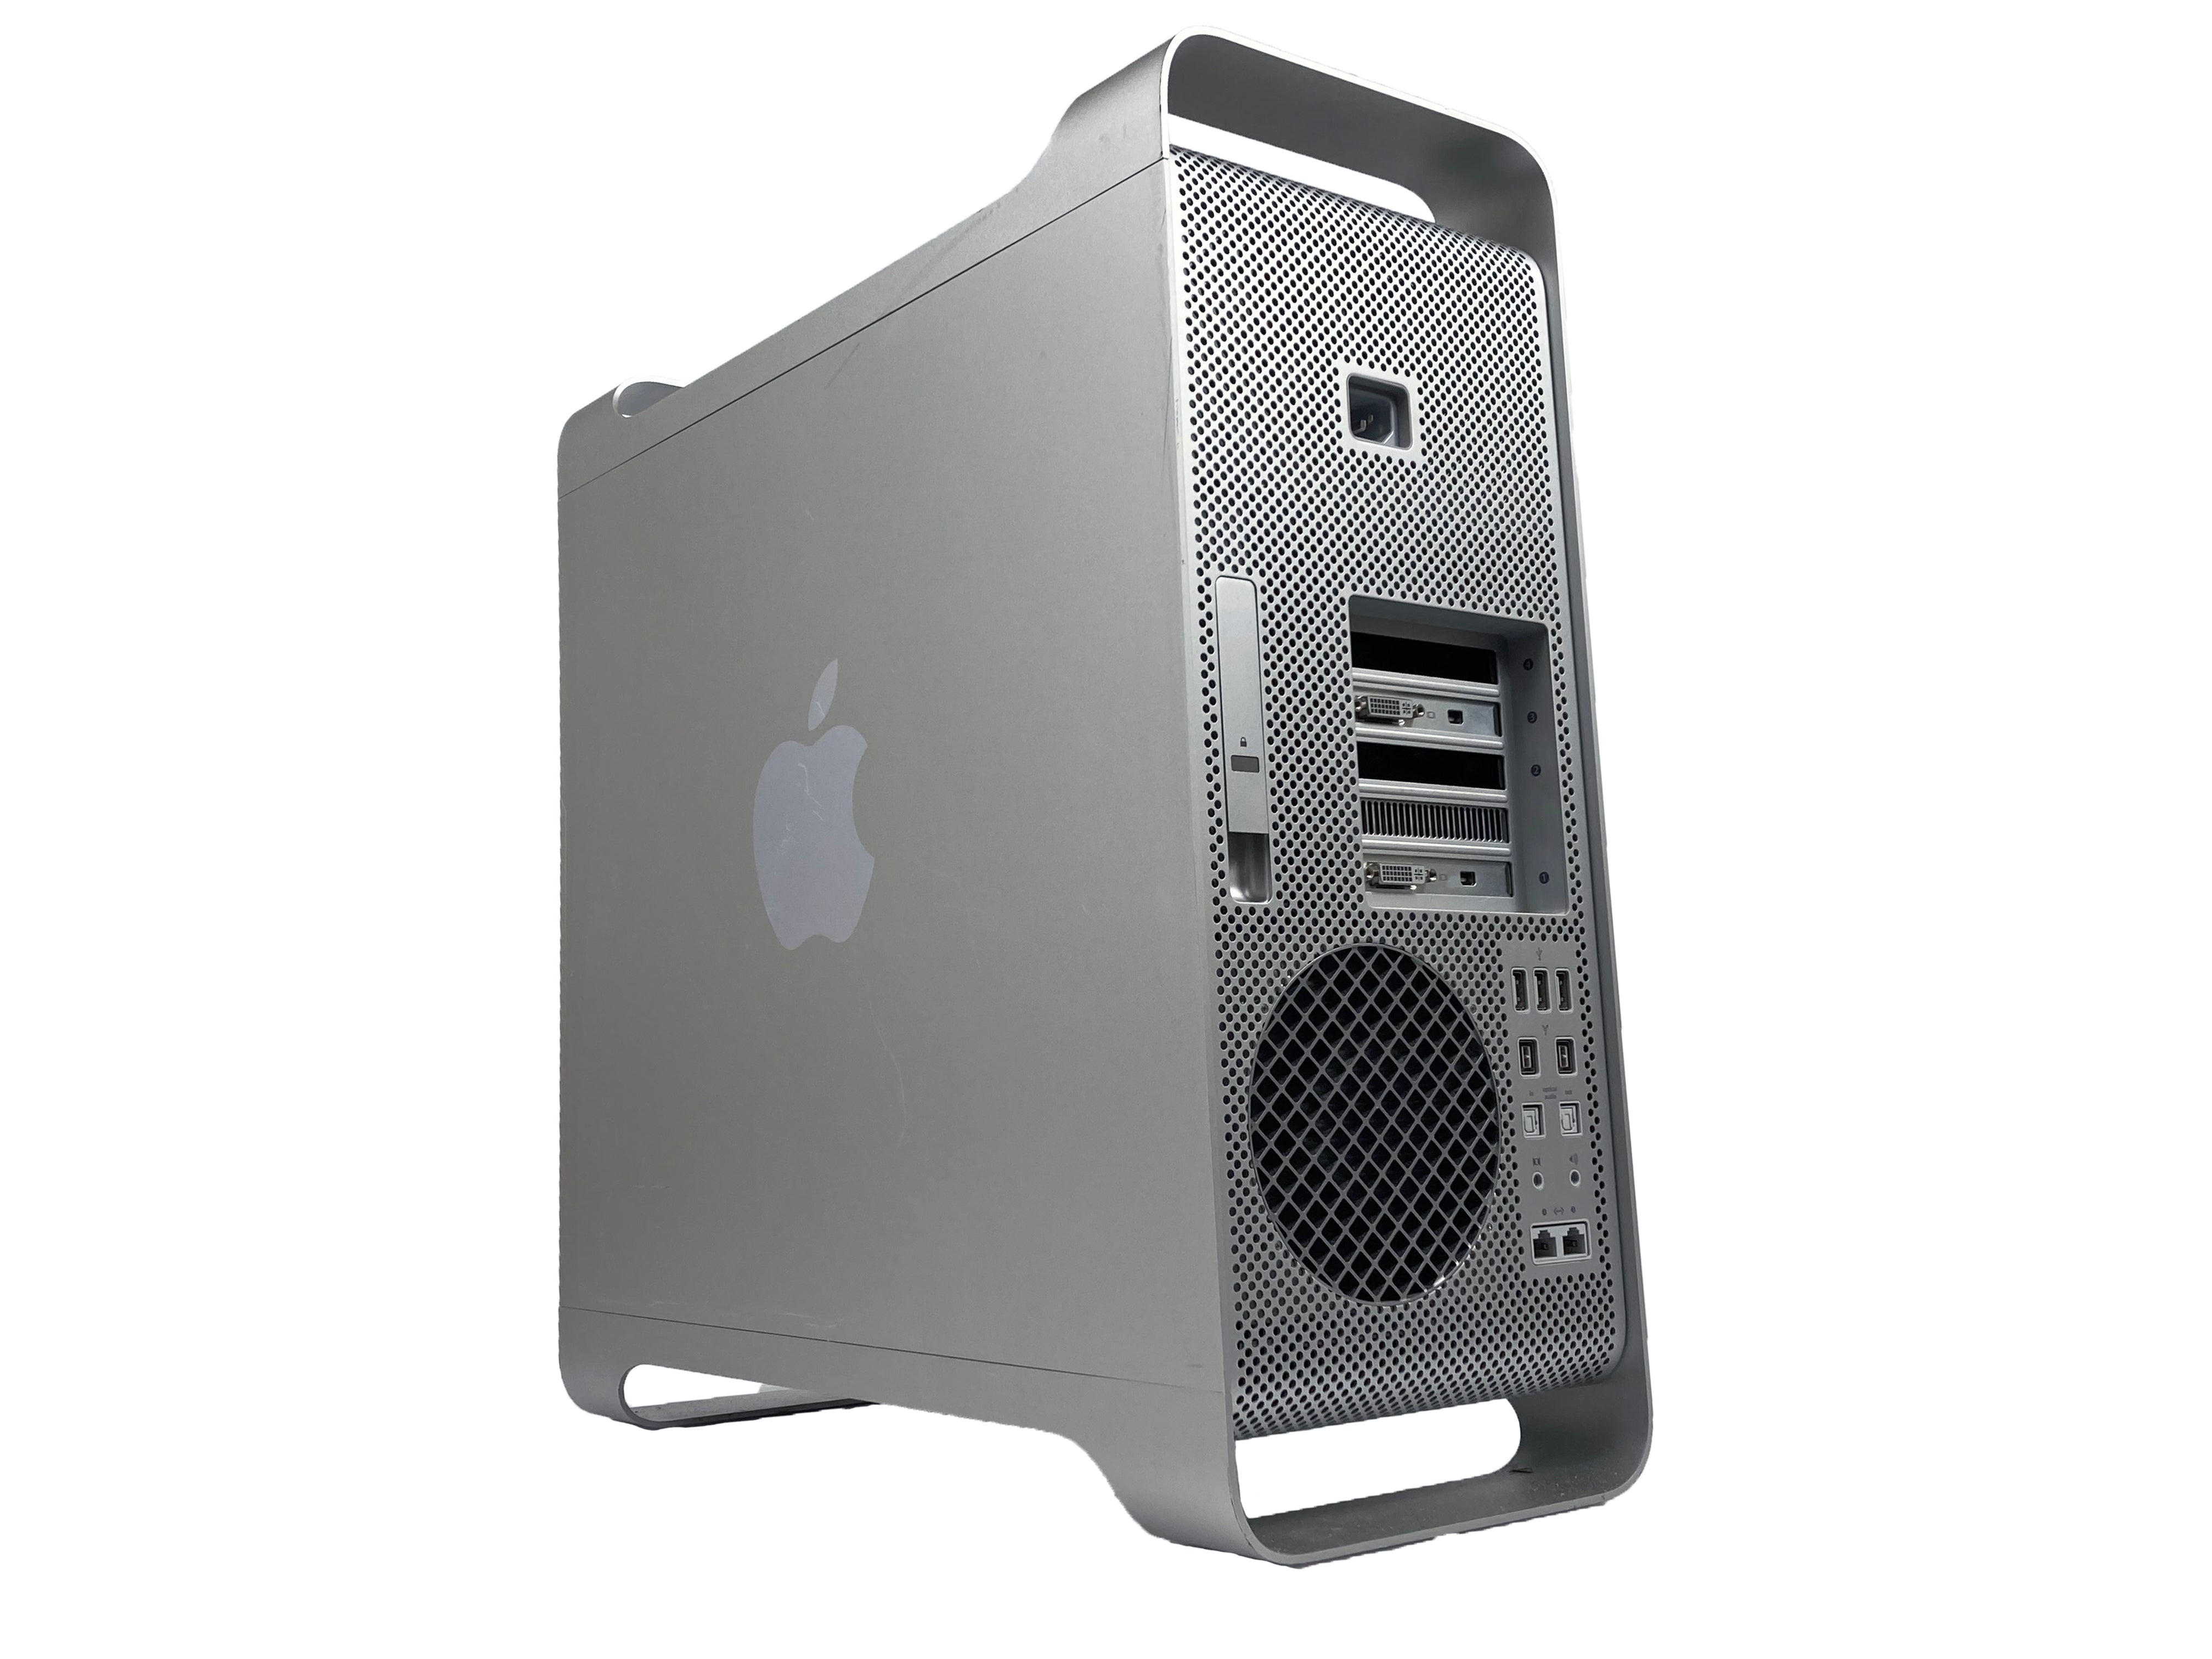 Apple MacPro "Quad Core" 2.6Ghz i5 (Early 2009) #2